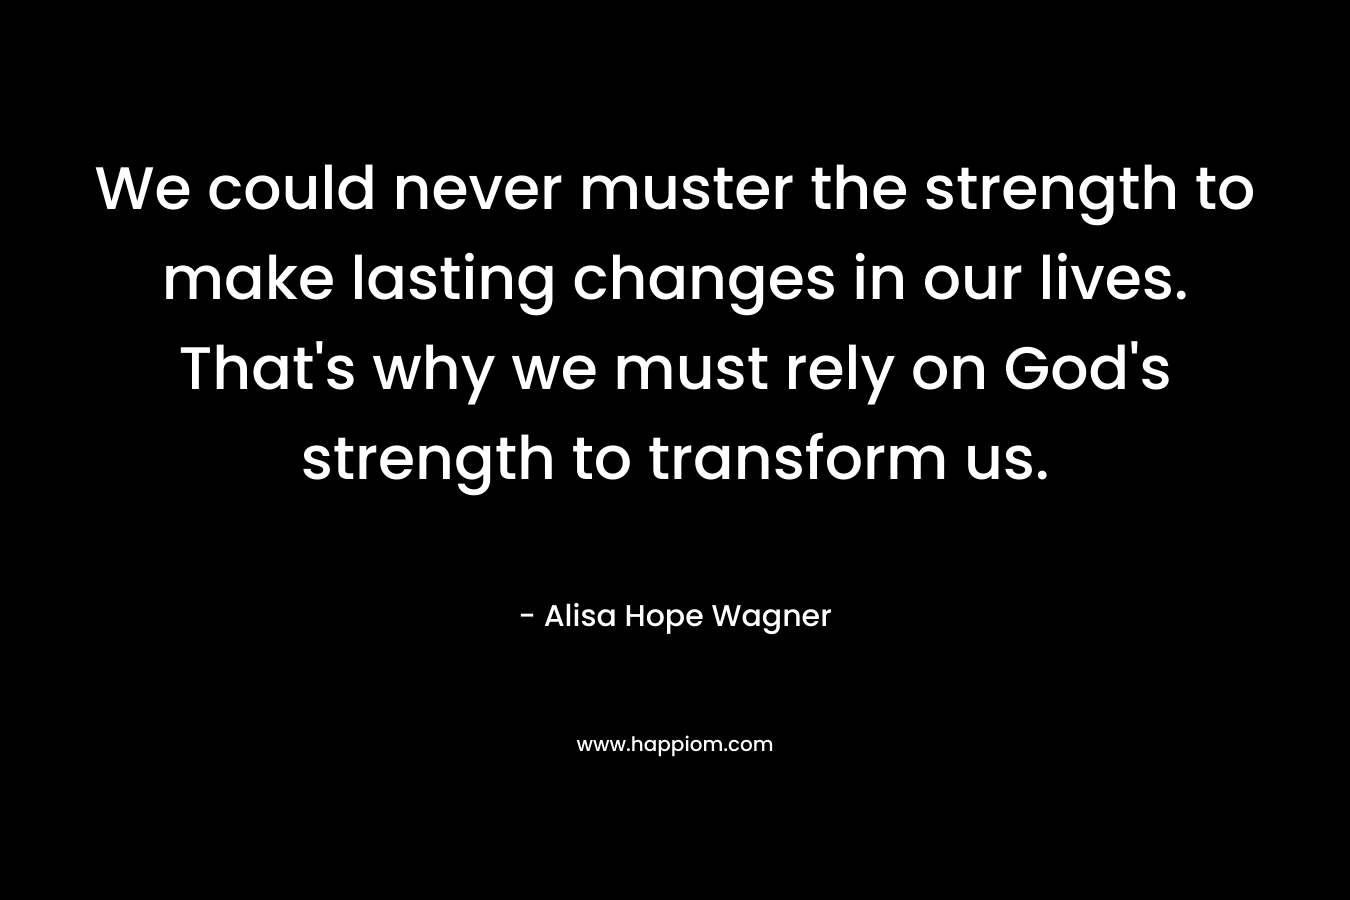 We could never muster the strength to make lasting changes in our lives. That's why we must rely on God's strength to transform us.